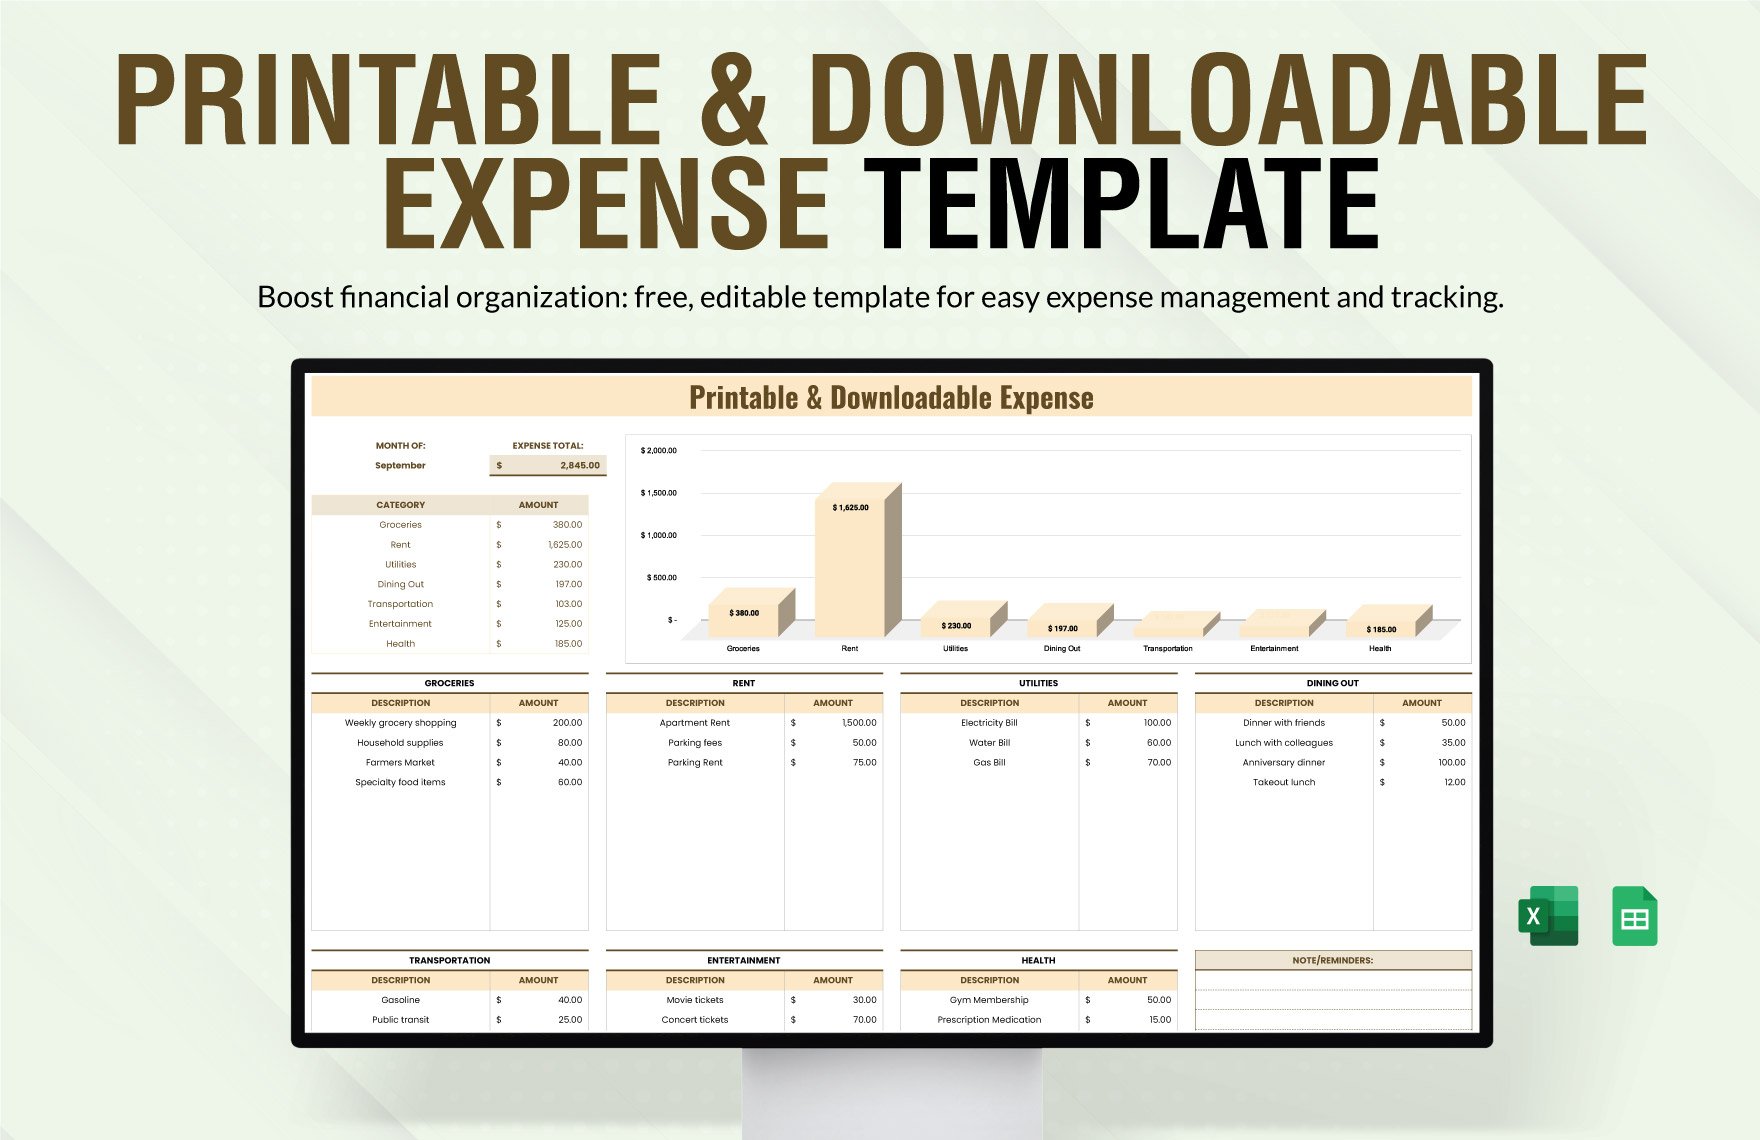 Free Printable & Downloadable Expense Template in Excel, Google Sheets